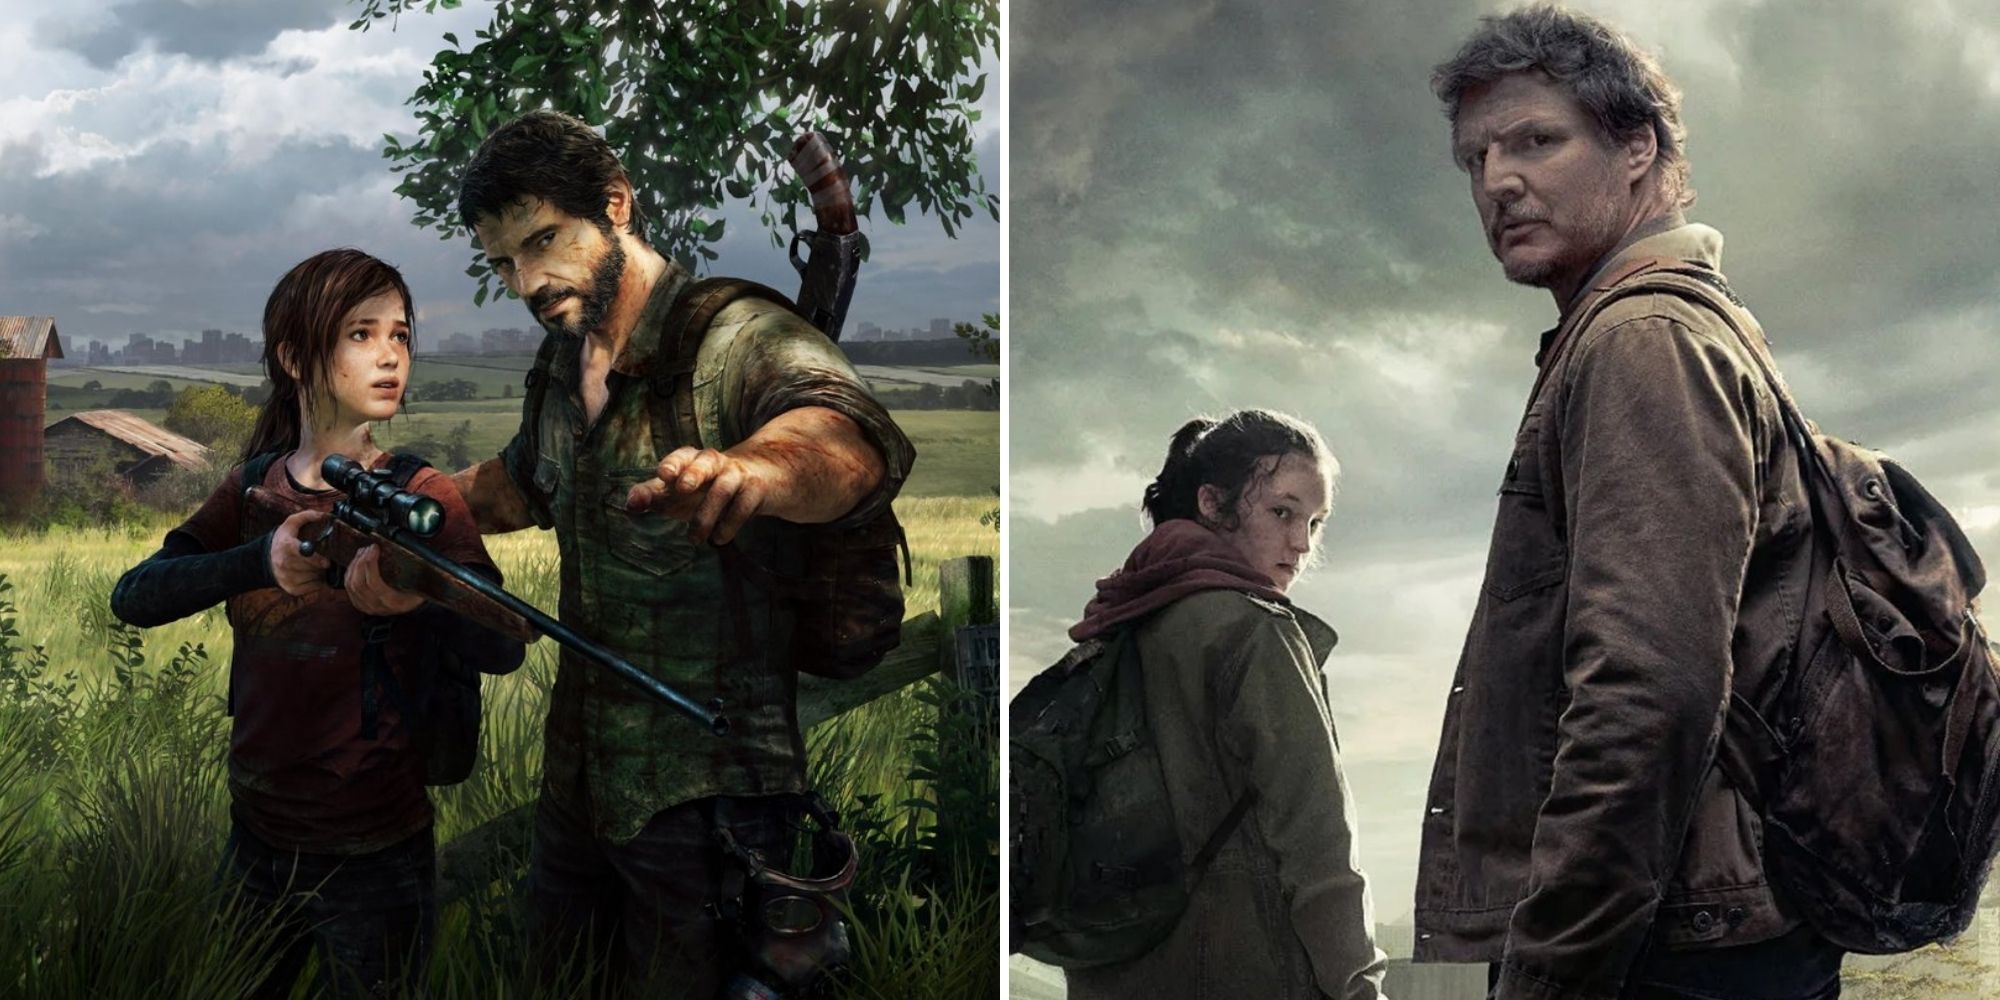 Joel and Ellie in The Last of Us game with Pedro Pascal and Bella Ramsey as Joel and Ellie in The Last of Us HBO series